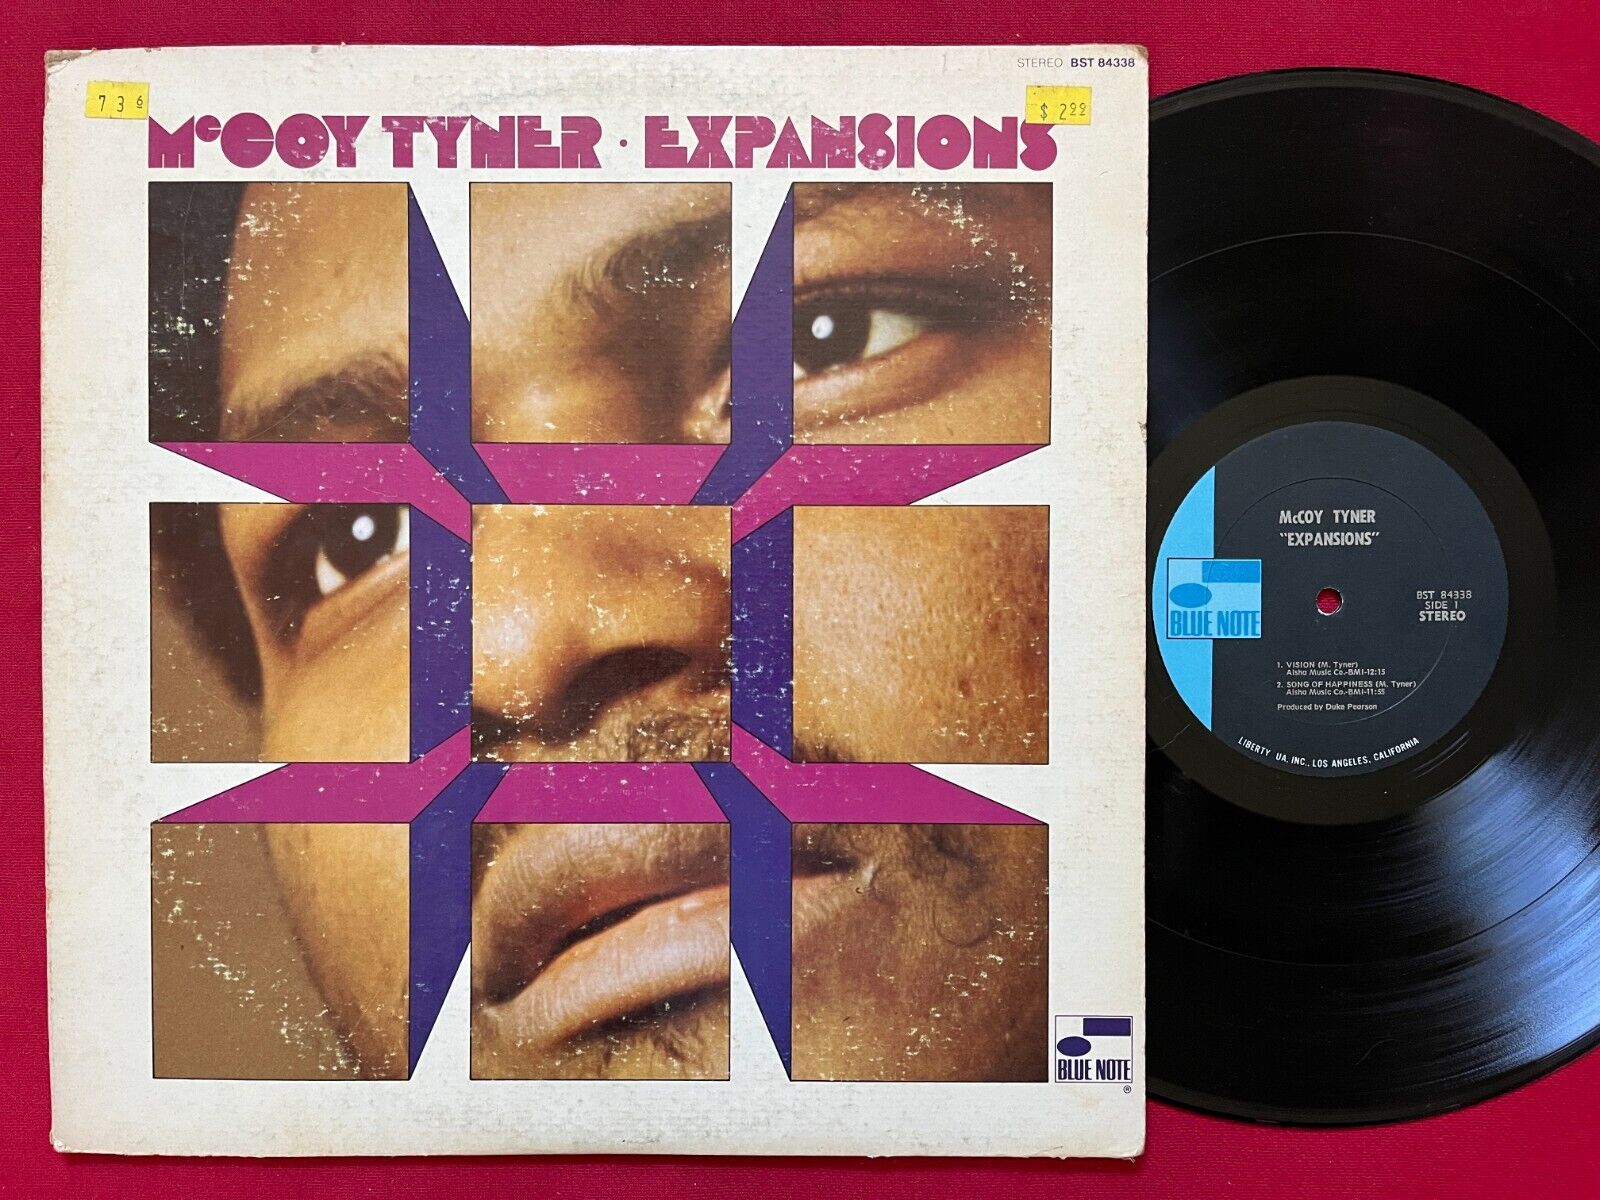 MCCOY TYNER ~ EXPANSIONS LP (1971) BLUE NOTE BST 84138 STEREO MODAL JAZZ